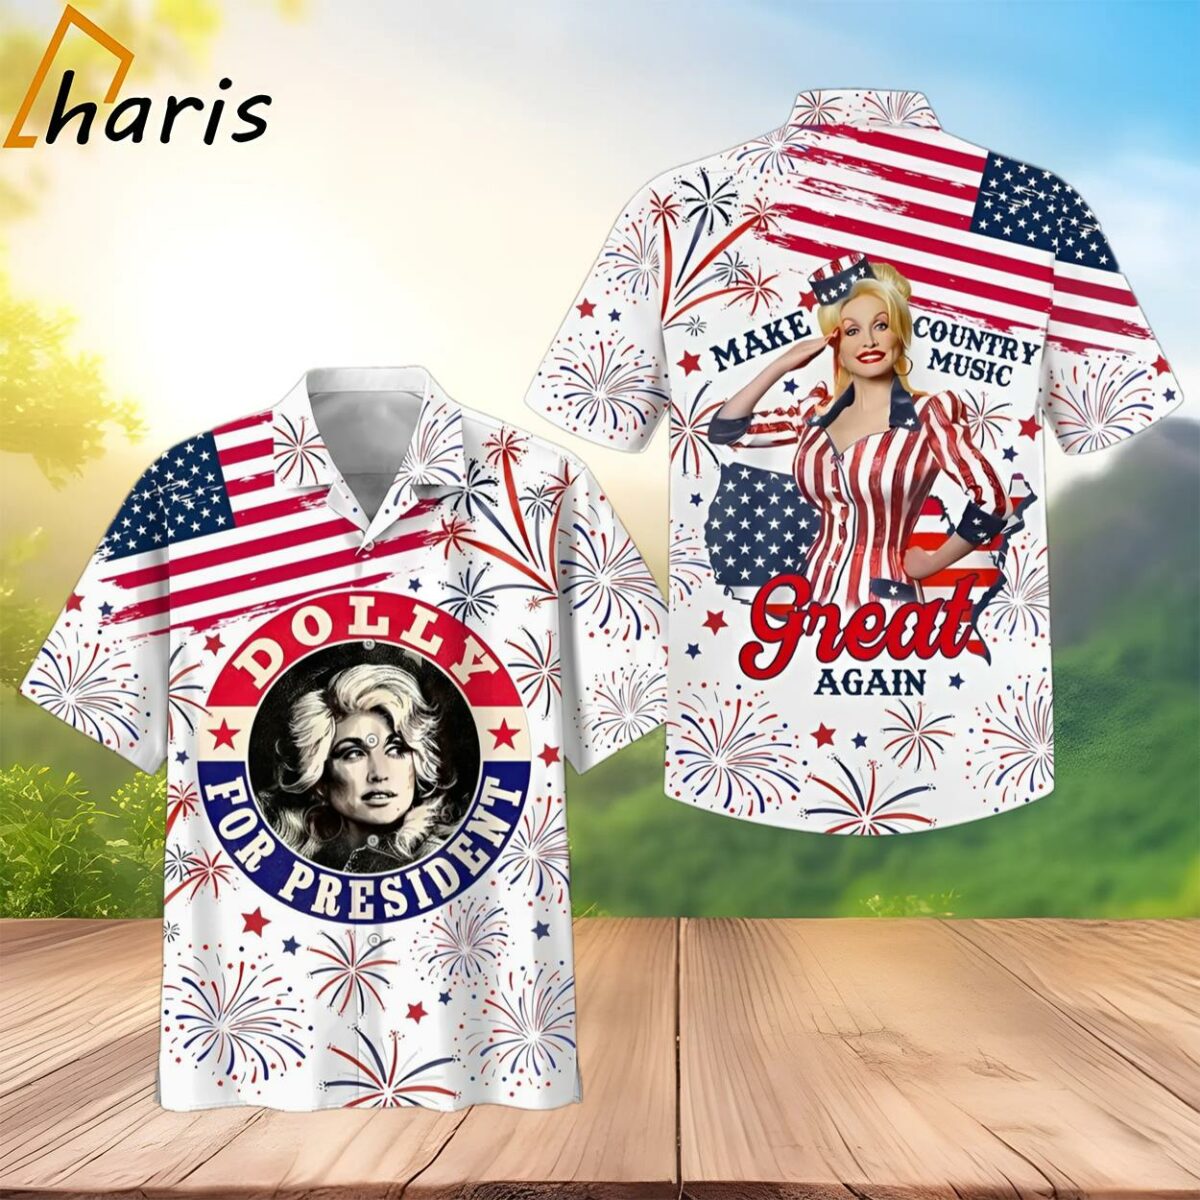 Dolly For Fresident Make Country Music Great Again Hawaiian Shirt 2 3